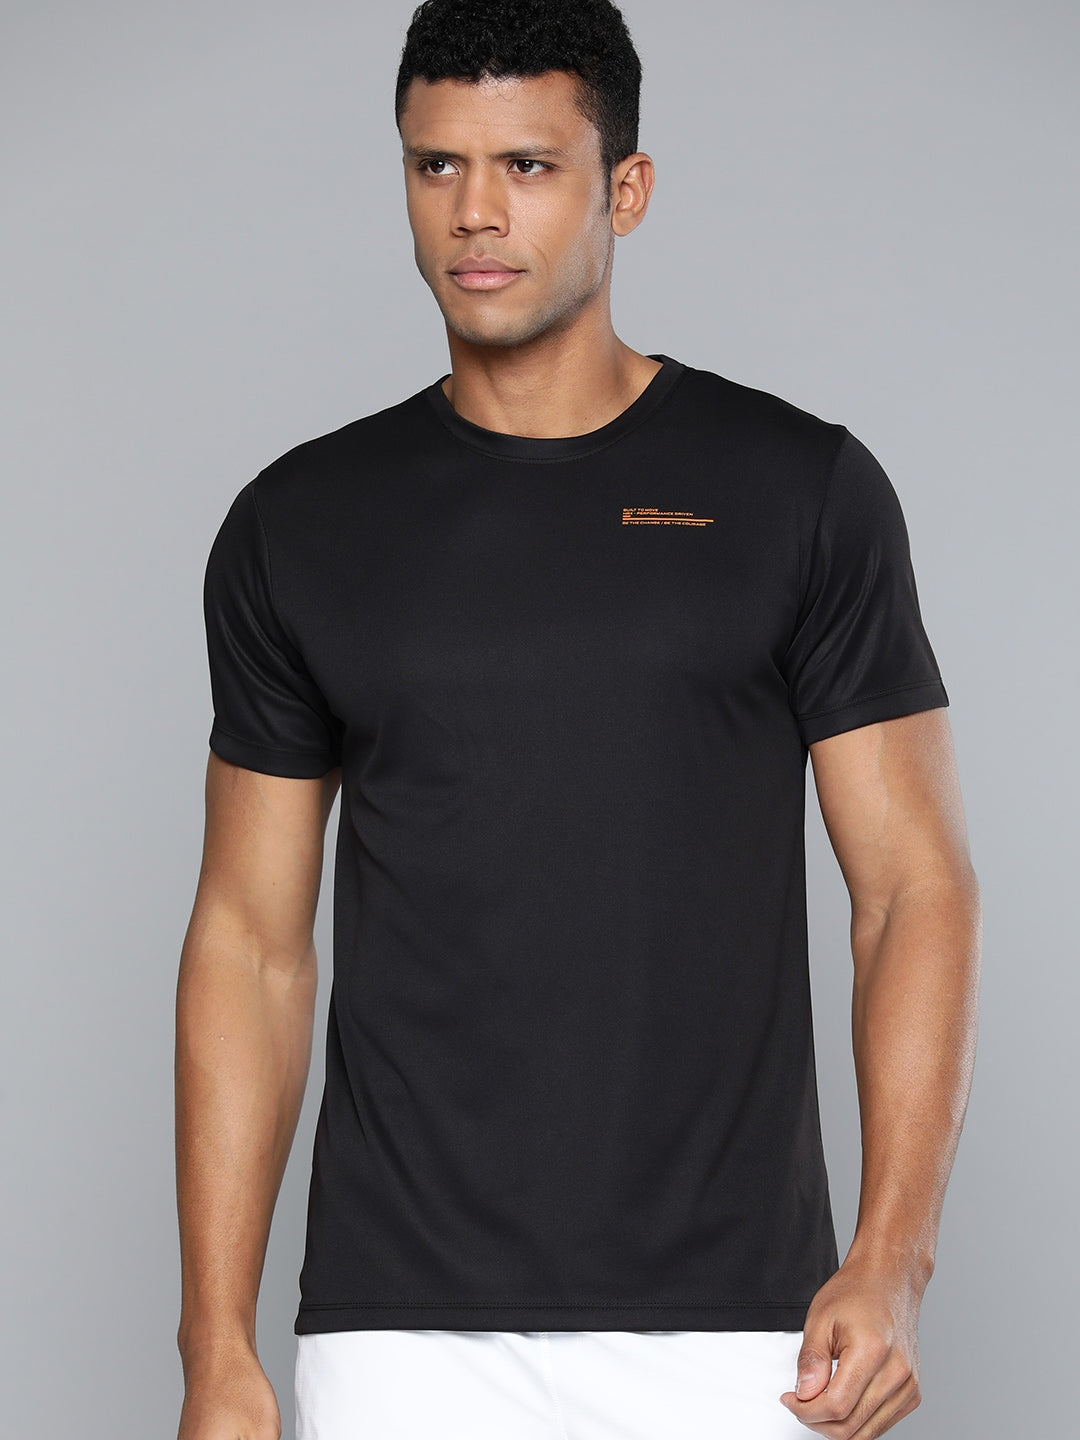 HRX by Hrithik Roshan Solid Antimicrobial Training T-shirt